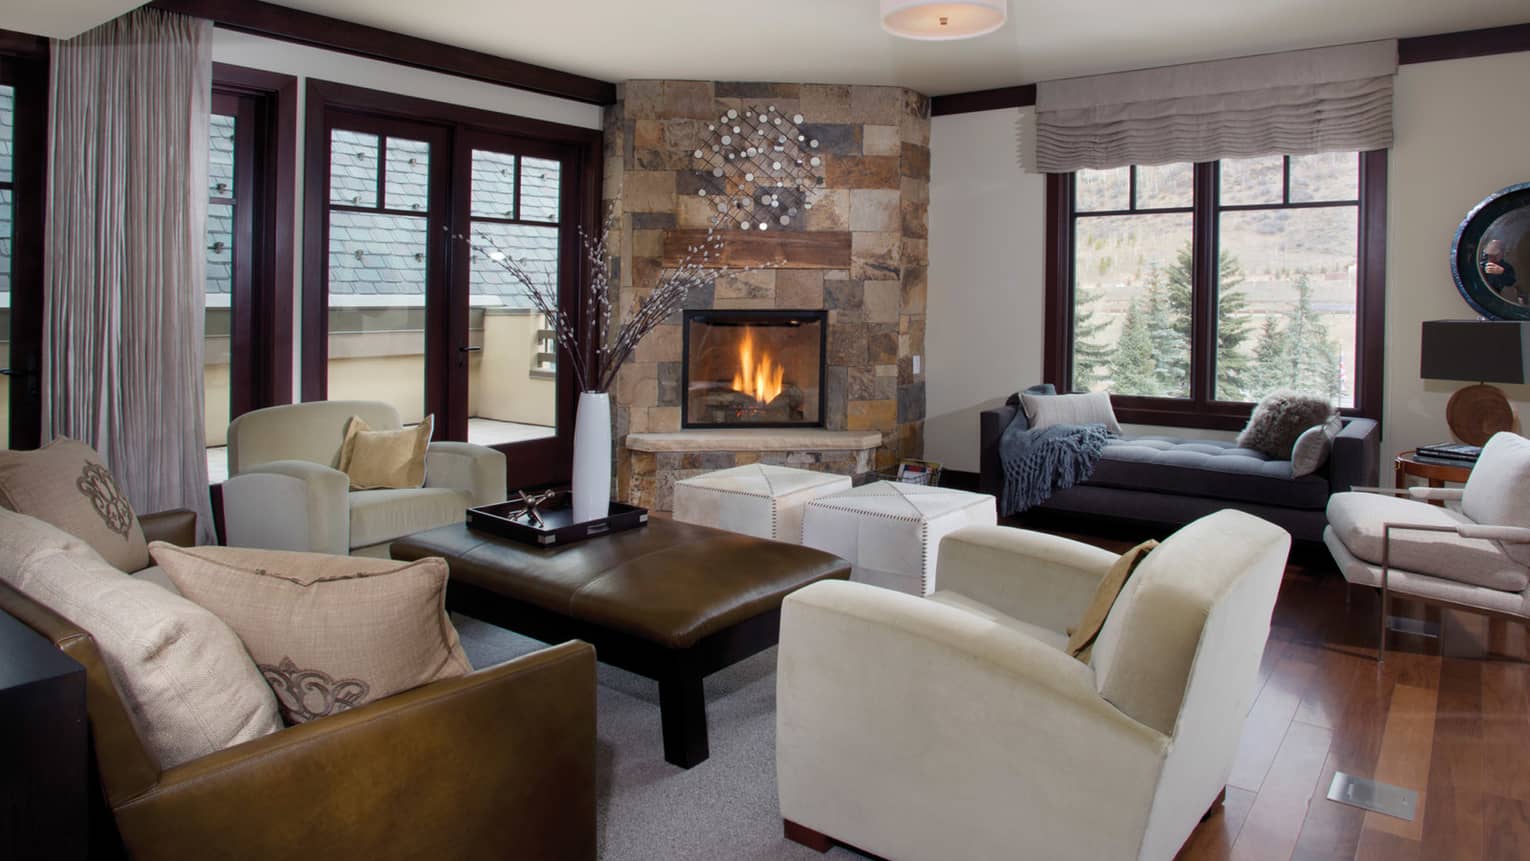 Two-bedroom residence suite living area with leather sofa and coffee table, window chaise, stone fireplace